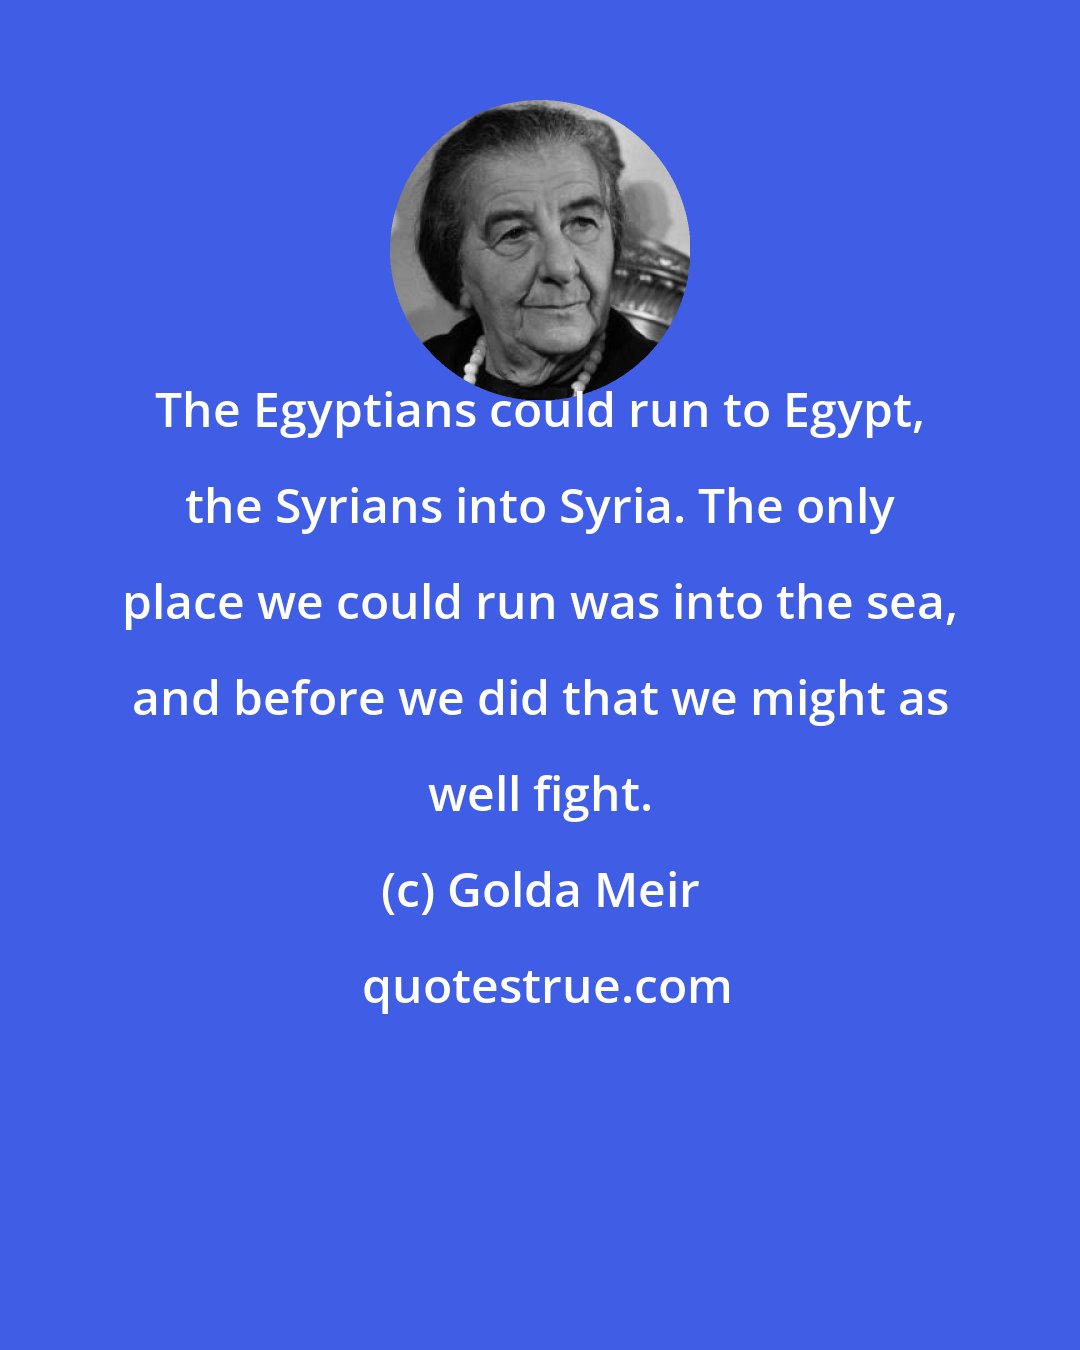 Golda Meir: The Egyptians could run to Egypt, the Syrians into Syria. The only place we could run was into the sea, and before we did that we might as well fight.